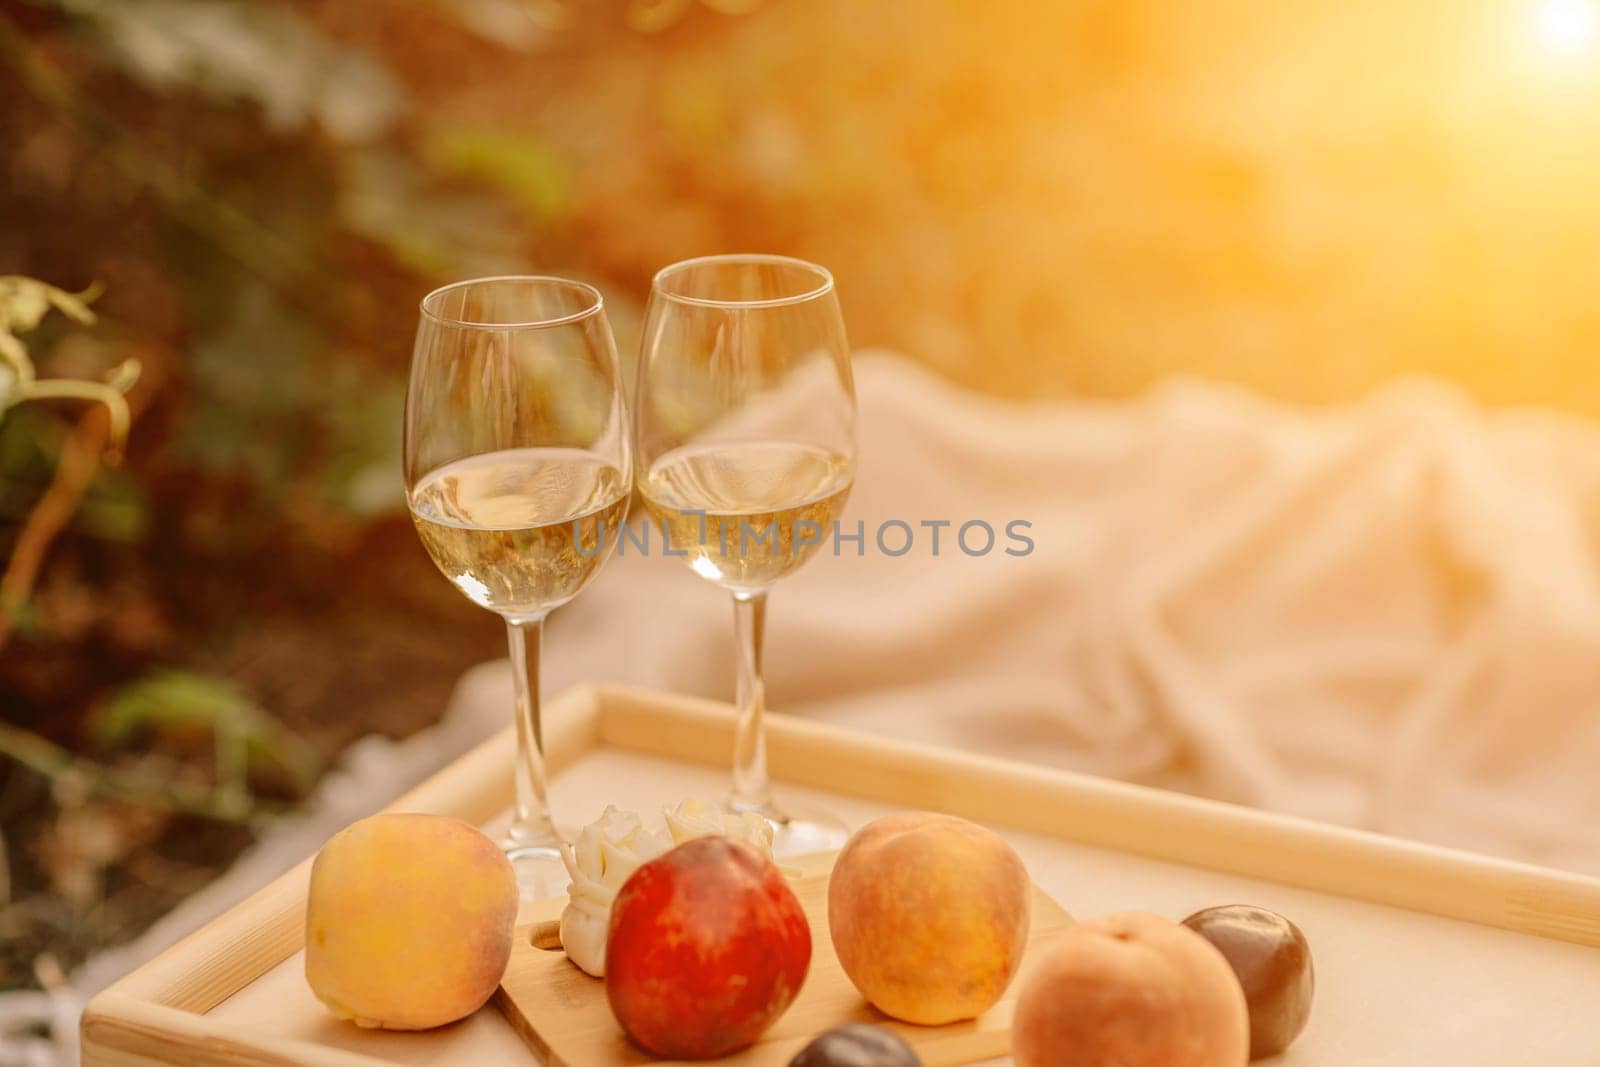 Glasses of a vineyard picnic. two glasses of white wine on a table overlooking the vineyards at sunset.